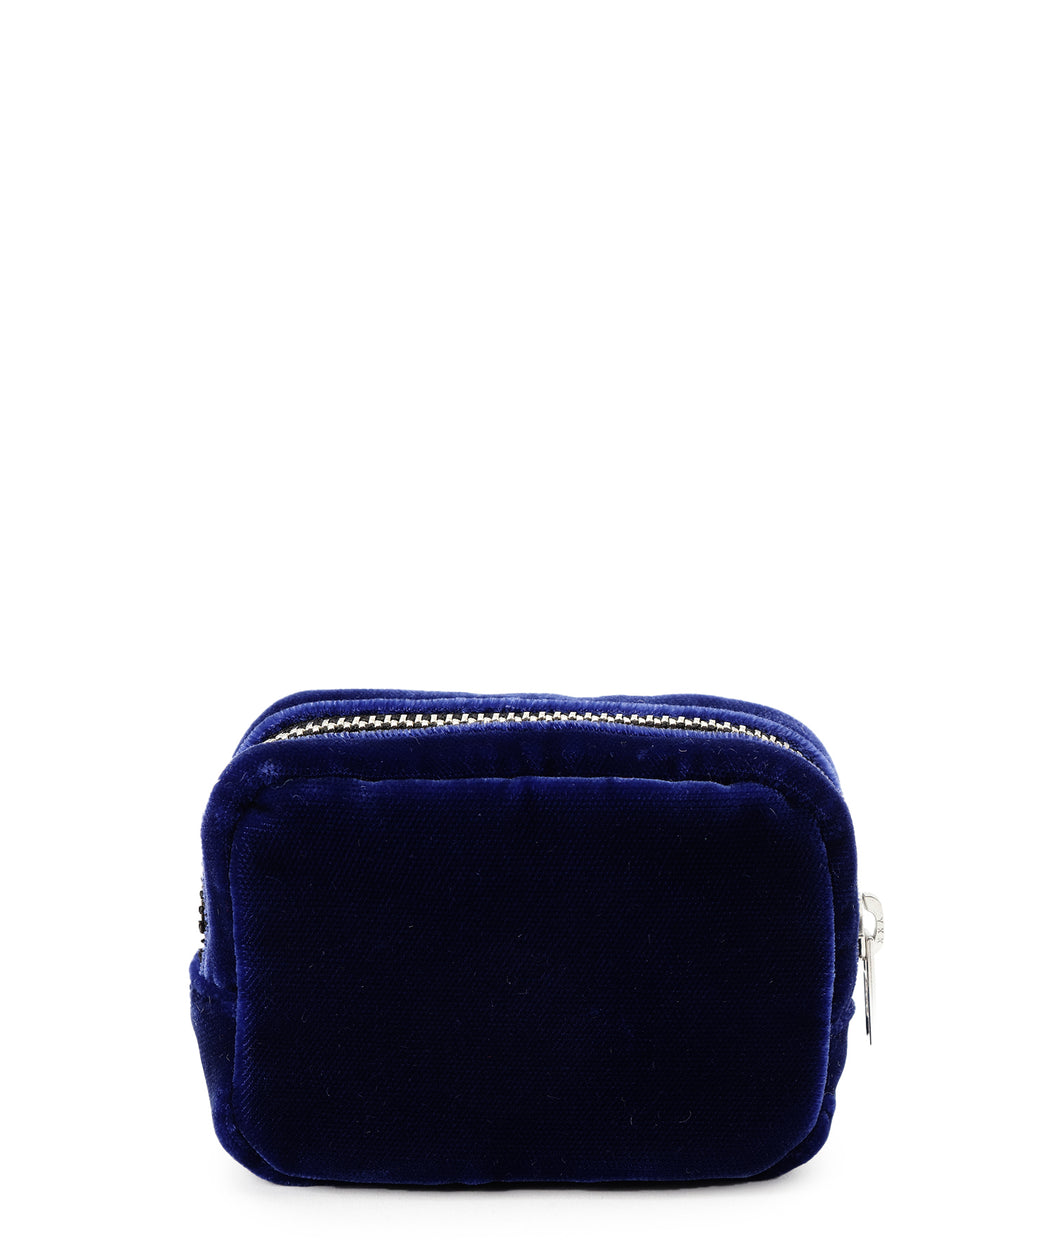 24S-Pouch 003